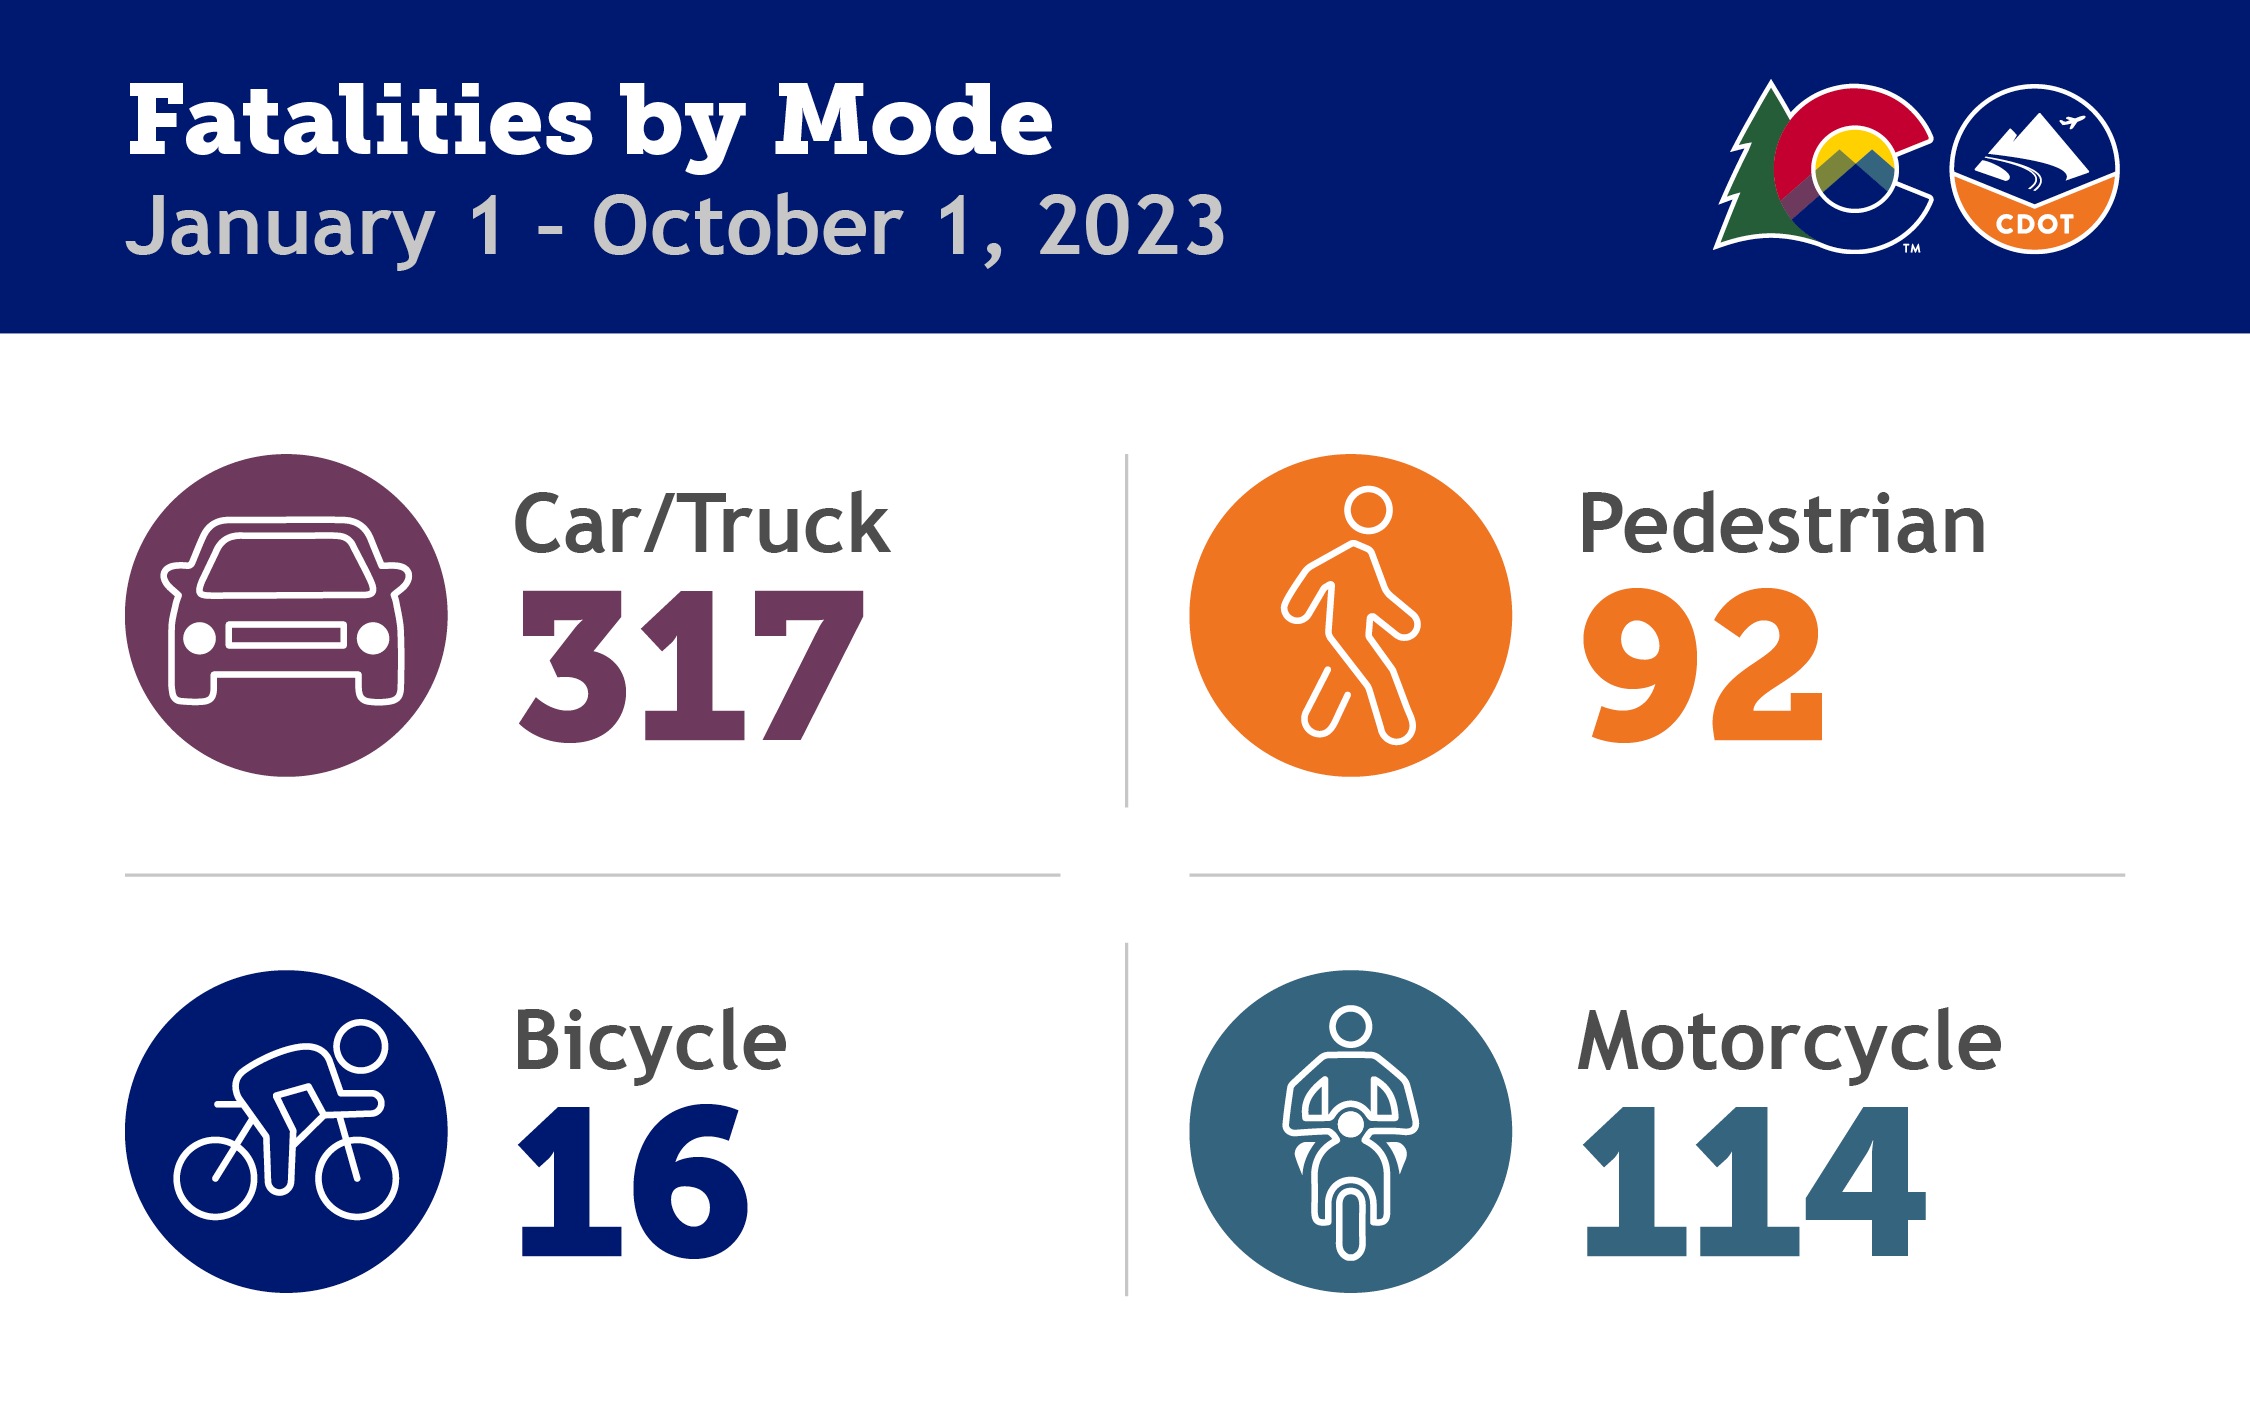 Fatalities by Mode January 1 - October 1, 2023 detail image